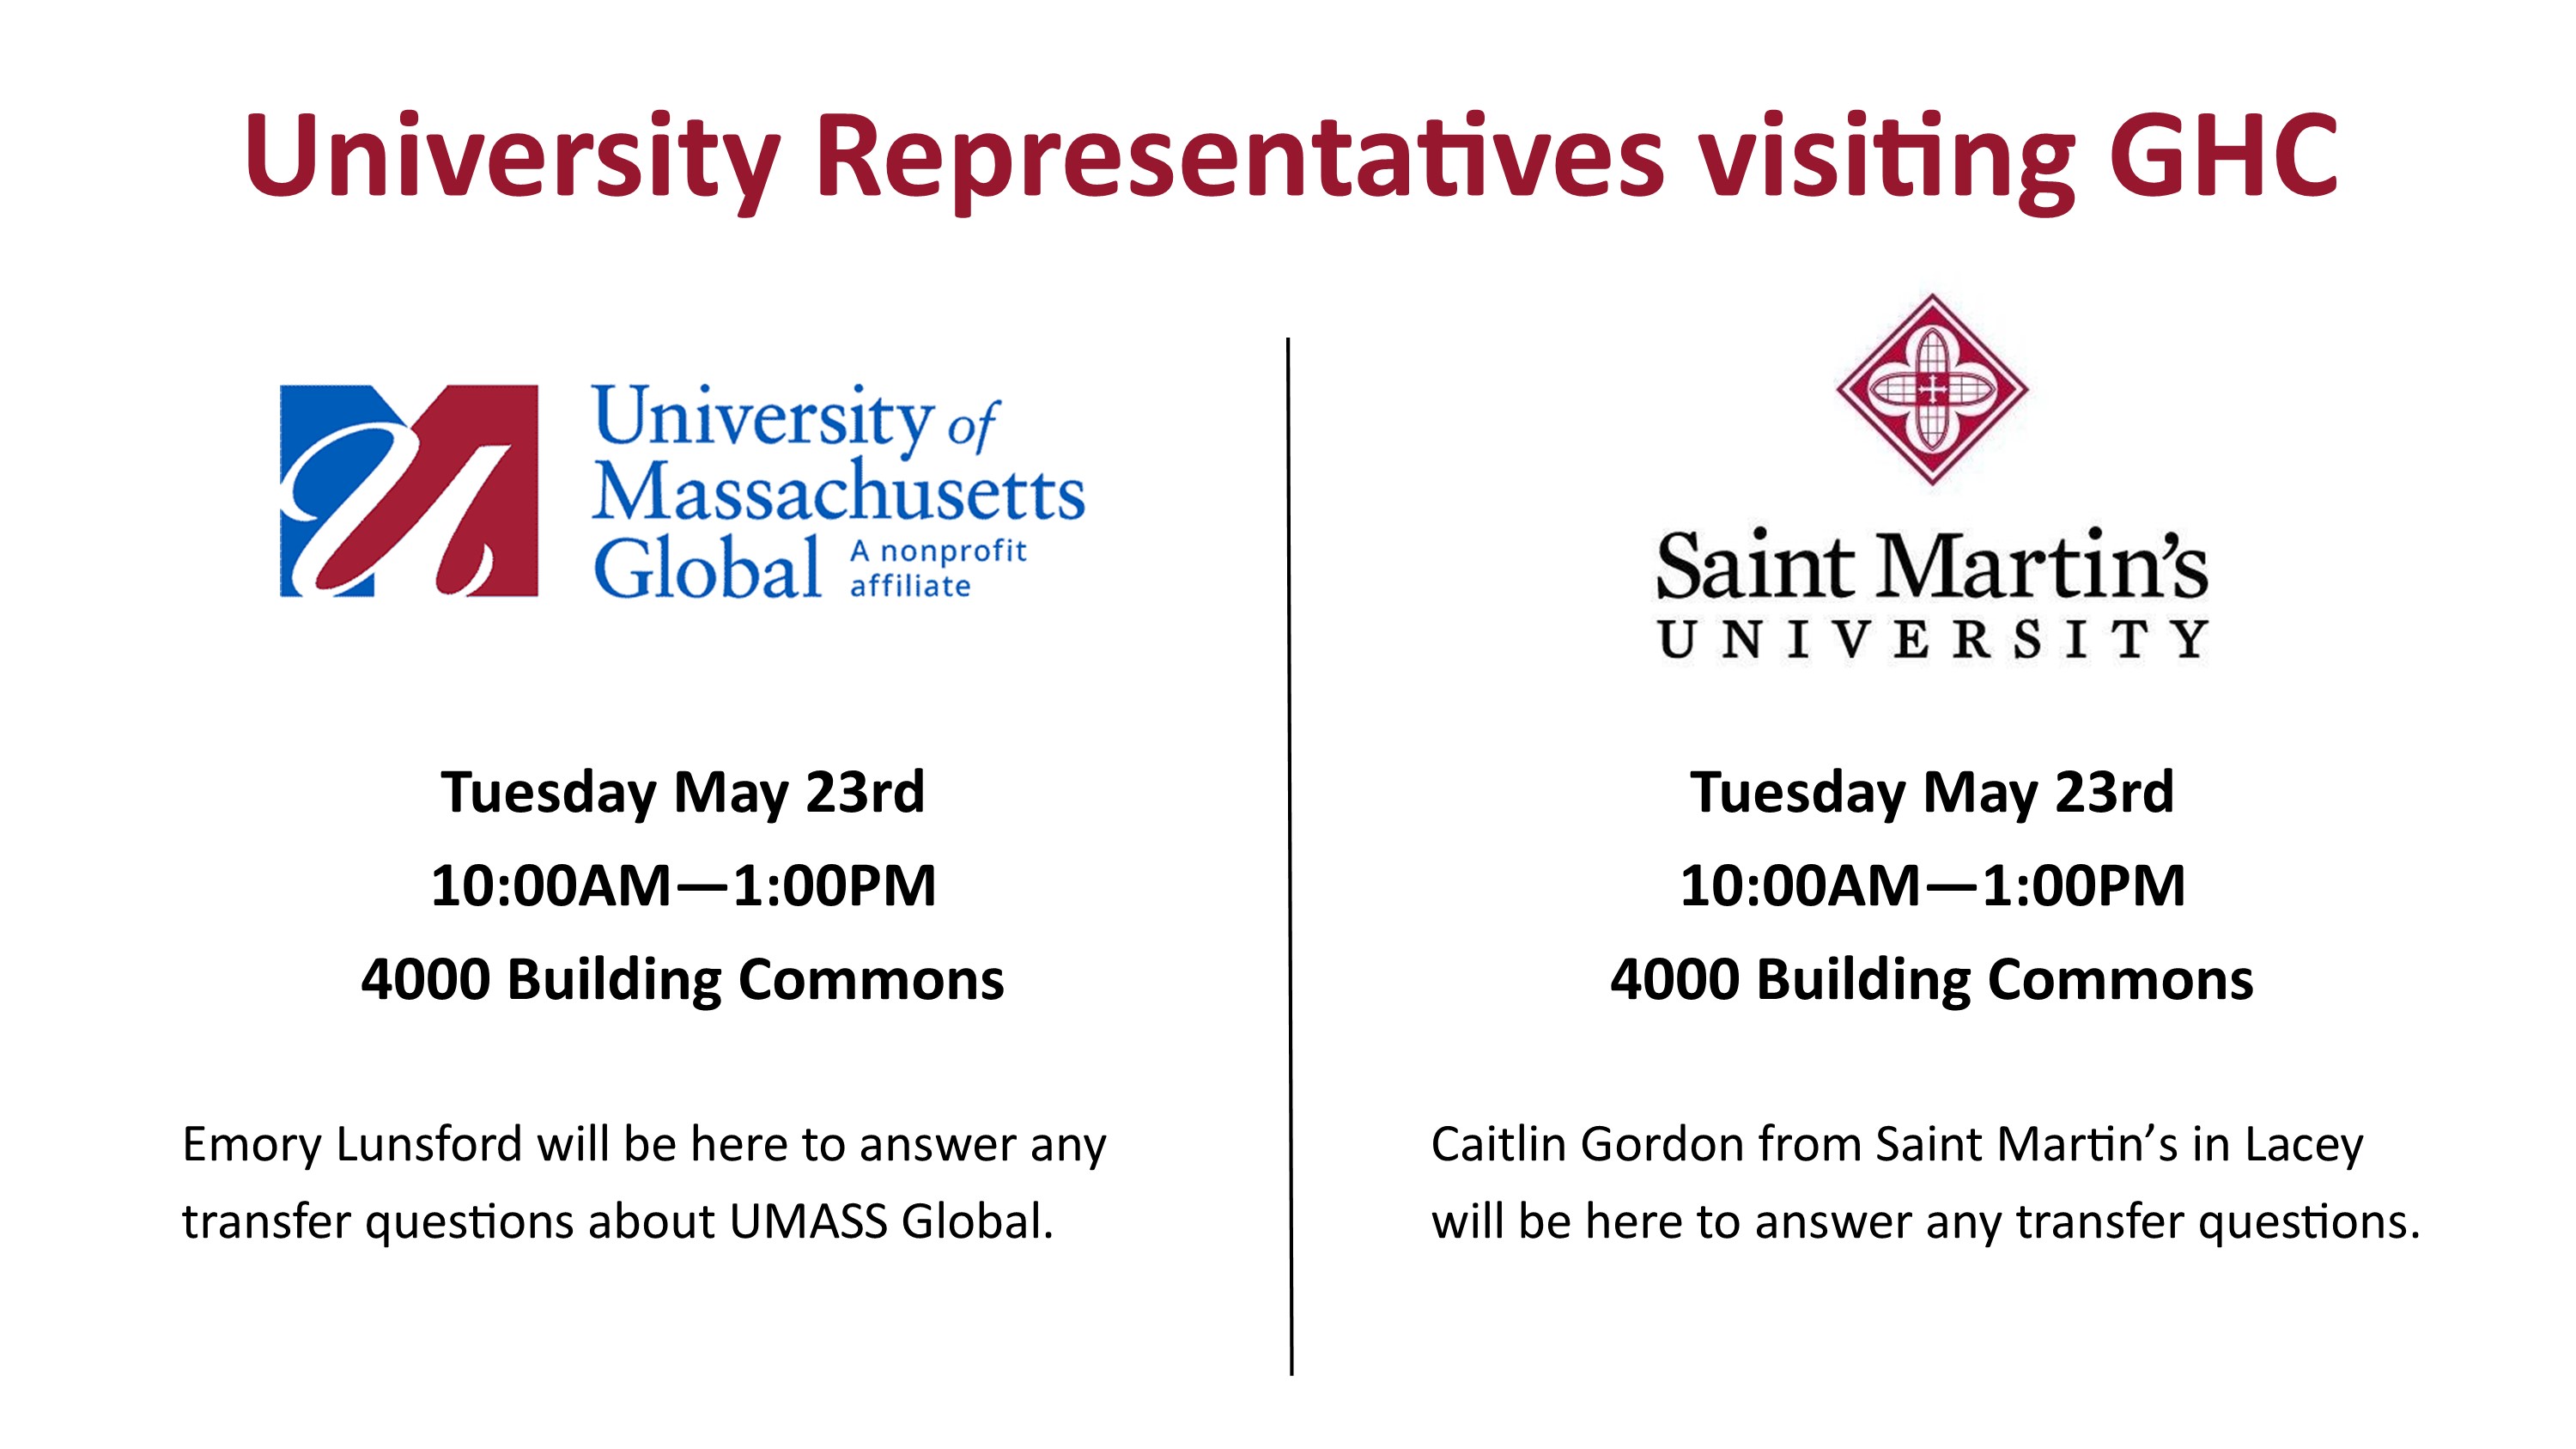 Emory Lunsford from University of Massachusetts Global and Caitlin Gordon from Saint Martin’s University will be in the 4000 building today, Tuesday May 23, 2023, to support students and staff with transfer questions.